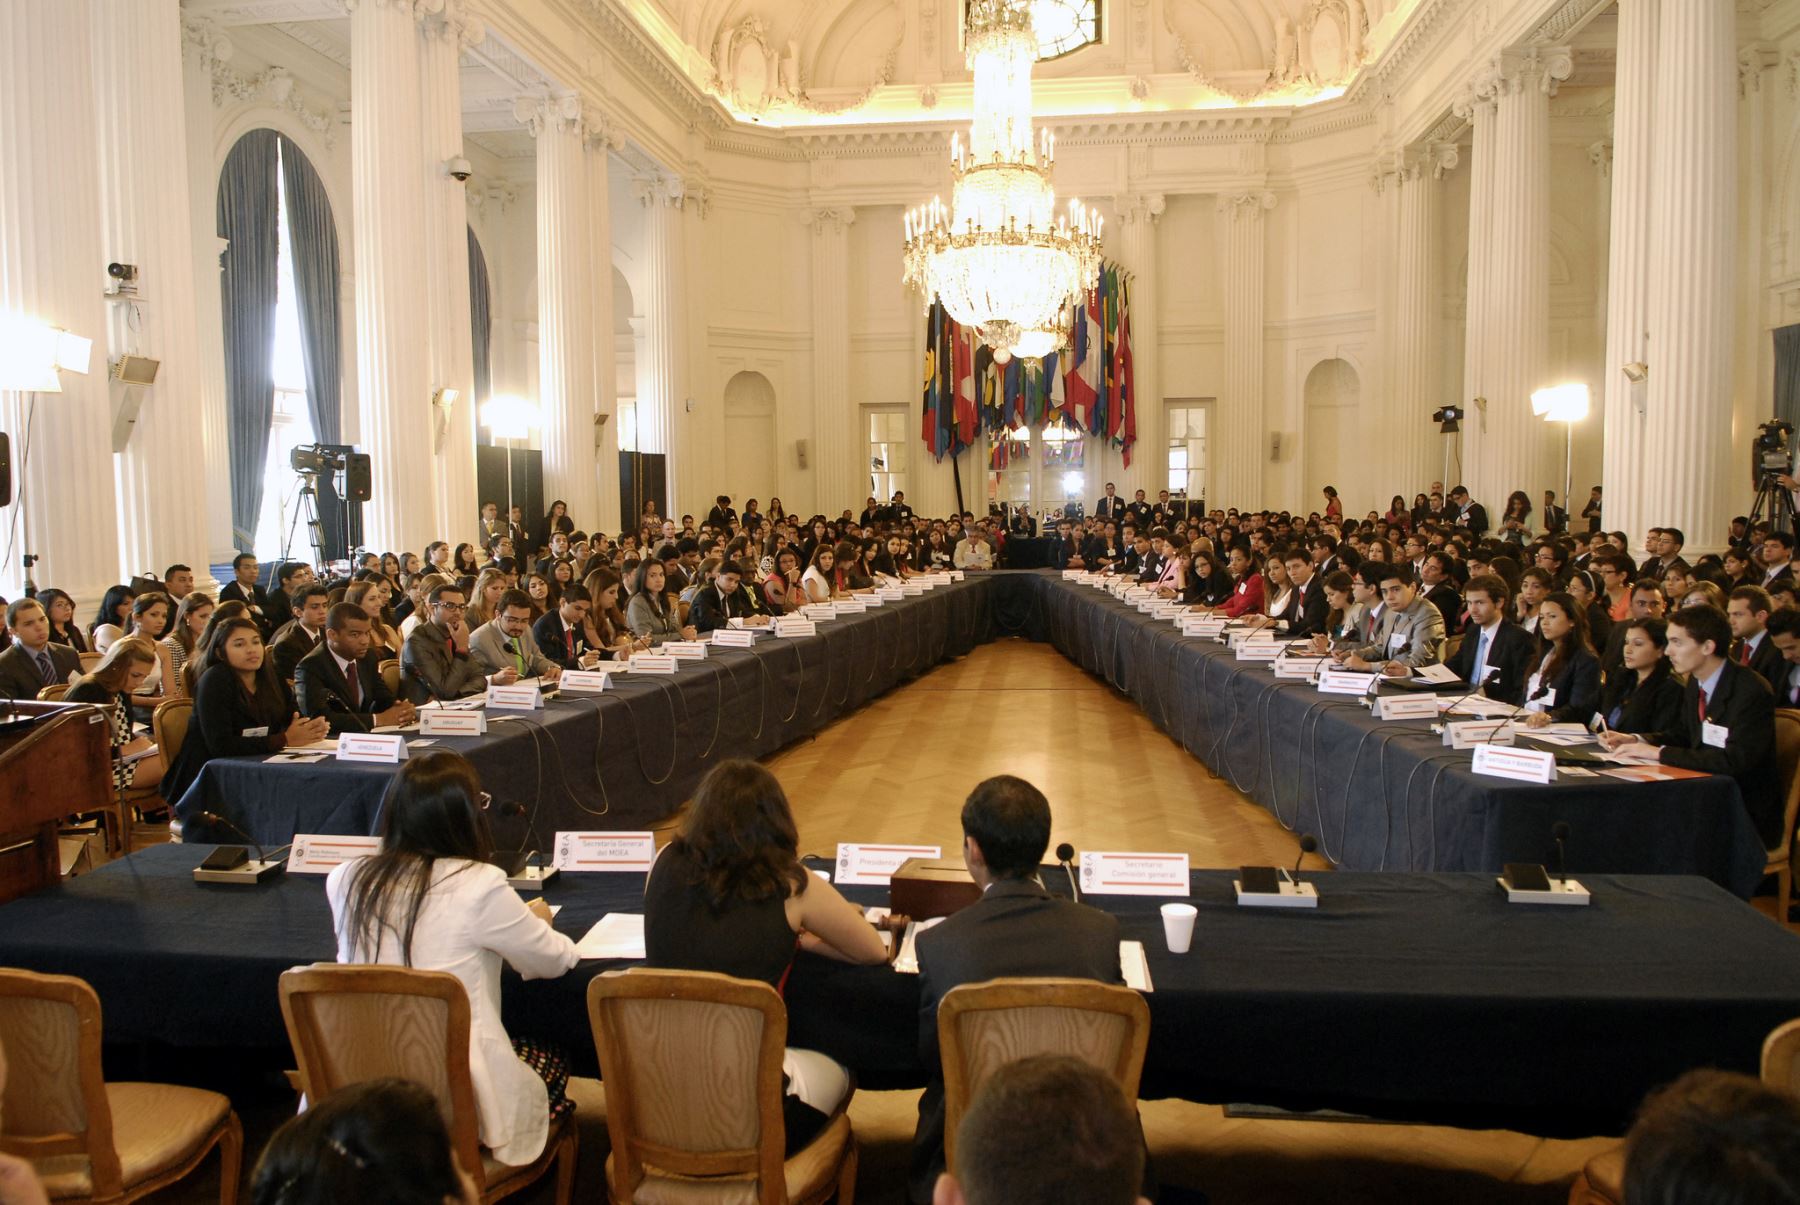 Model OAS General Assembly (MOAS) for Universities of the Hemisphere.